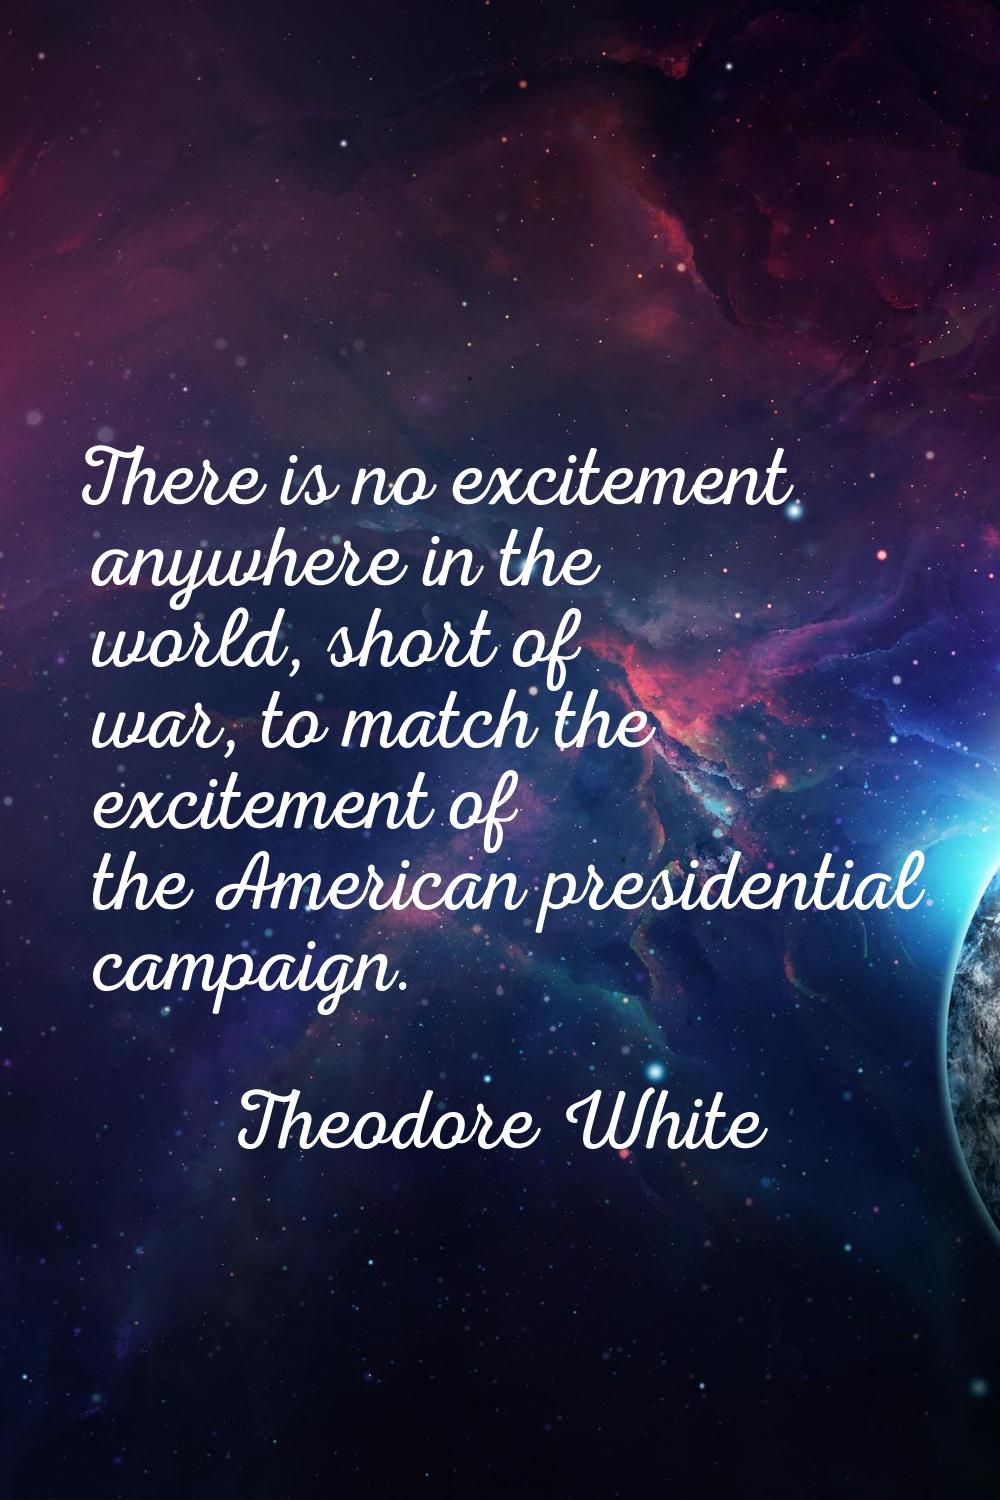 There is no excitement anywhere in the world, short of war, to match the excitement of the American